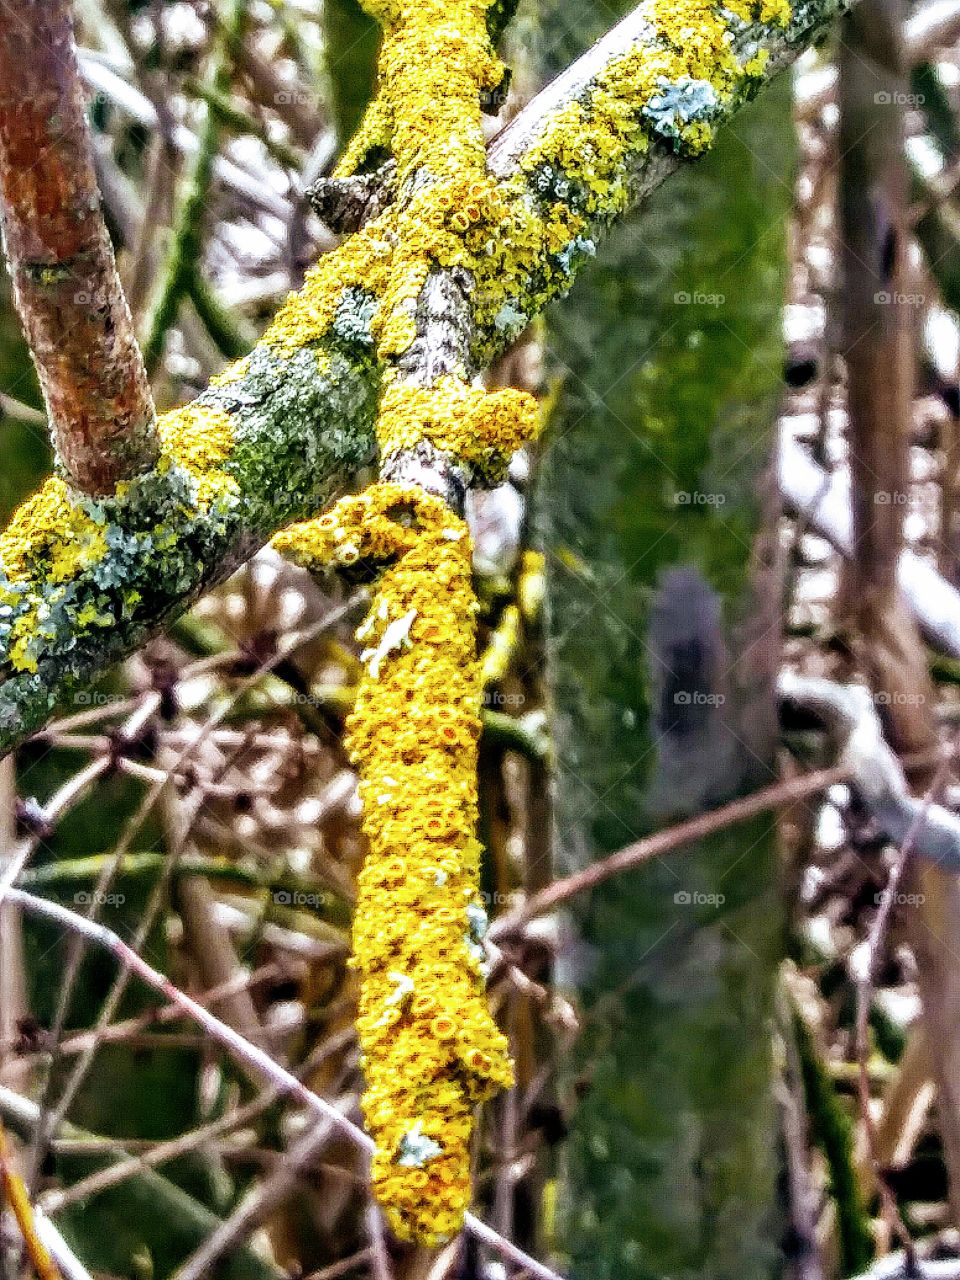 yellow and green mosses growing on light colored trees. bright beautiful colors